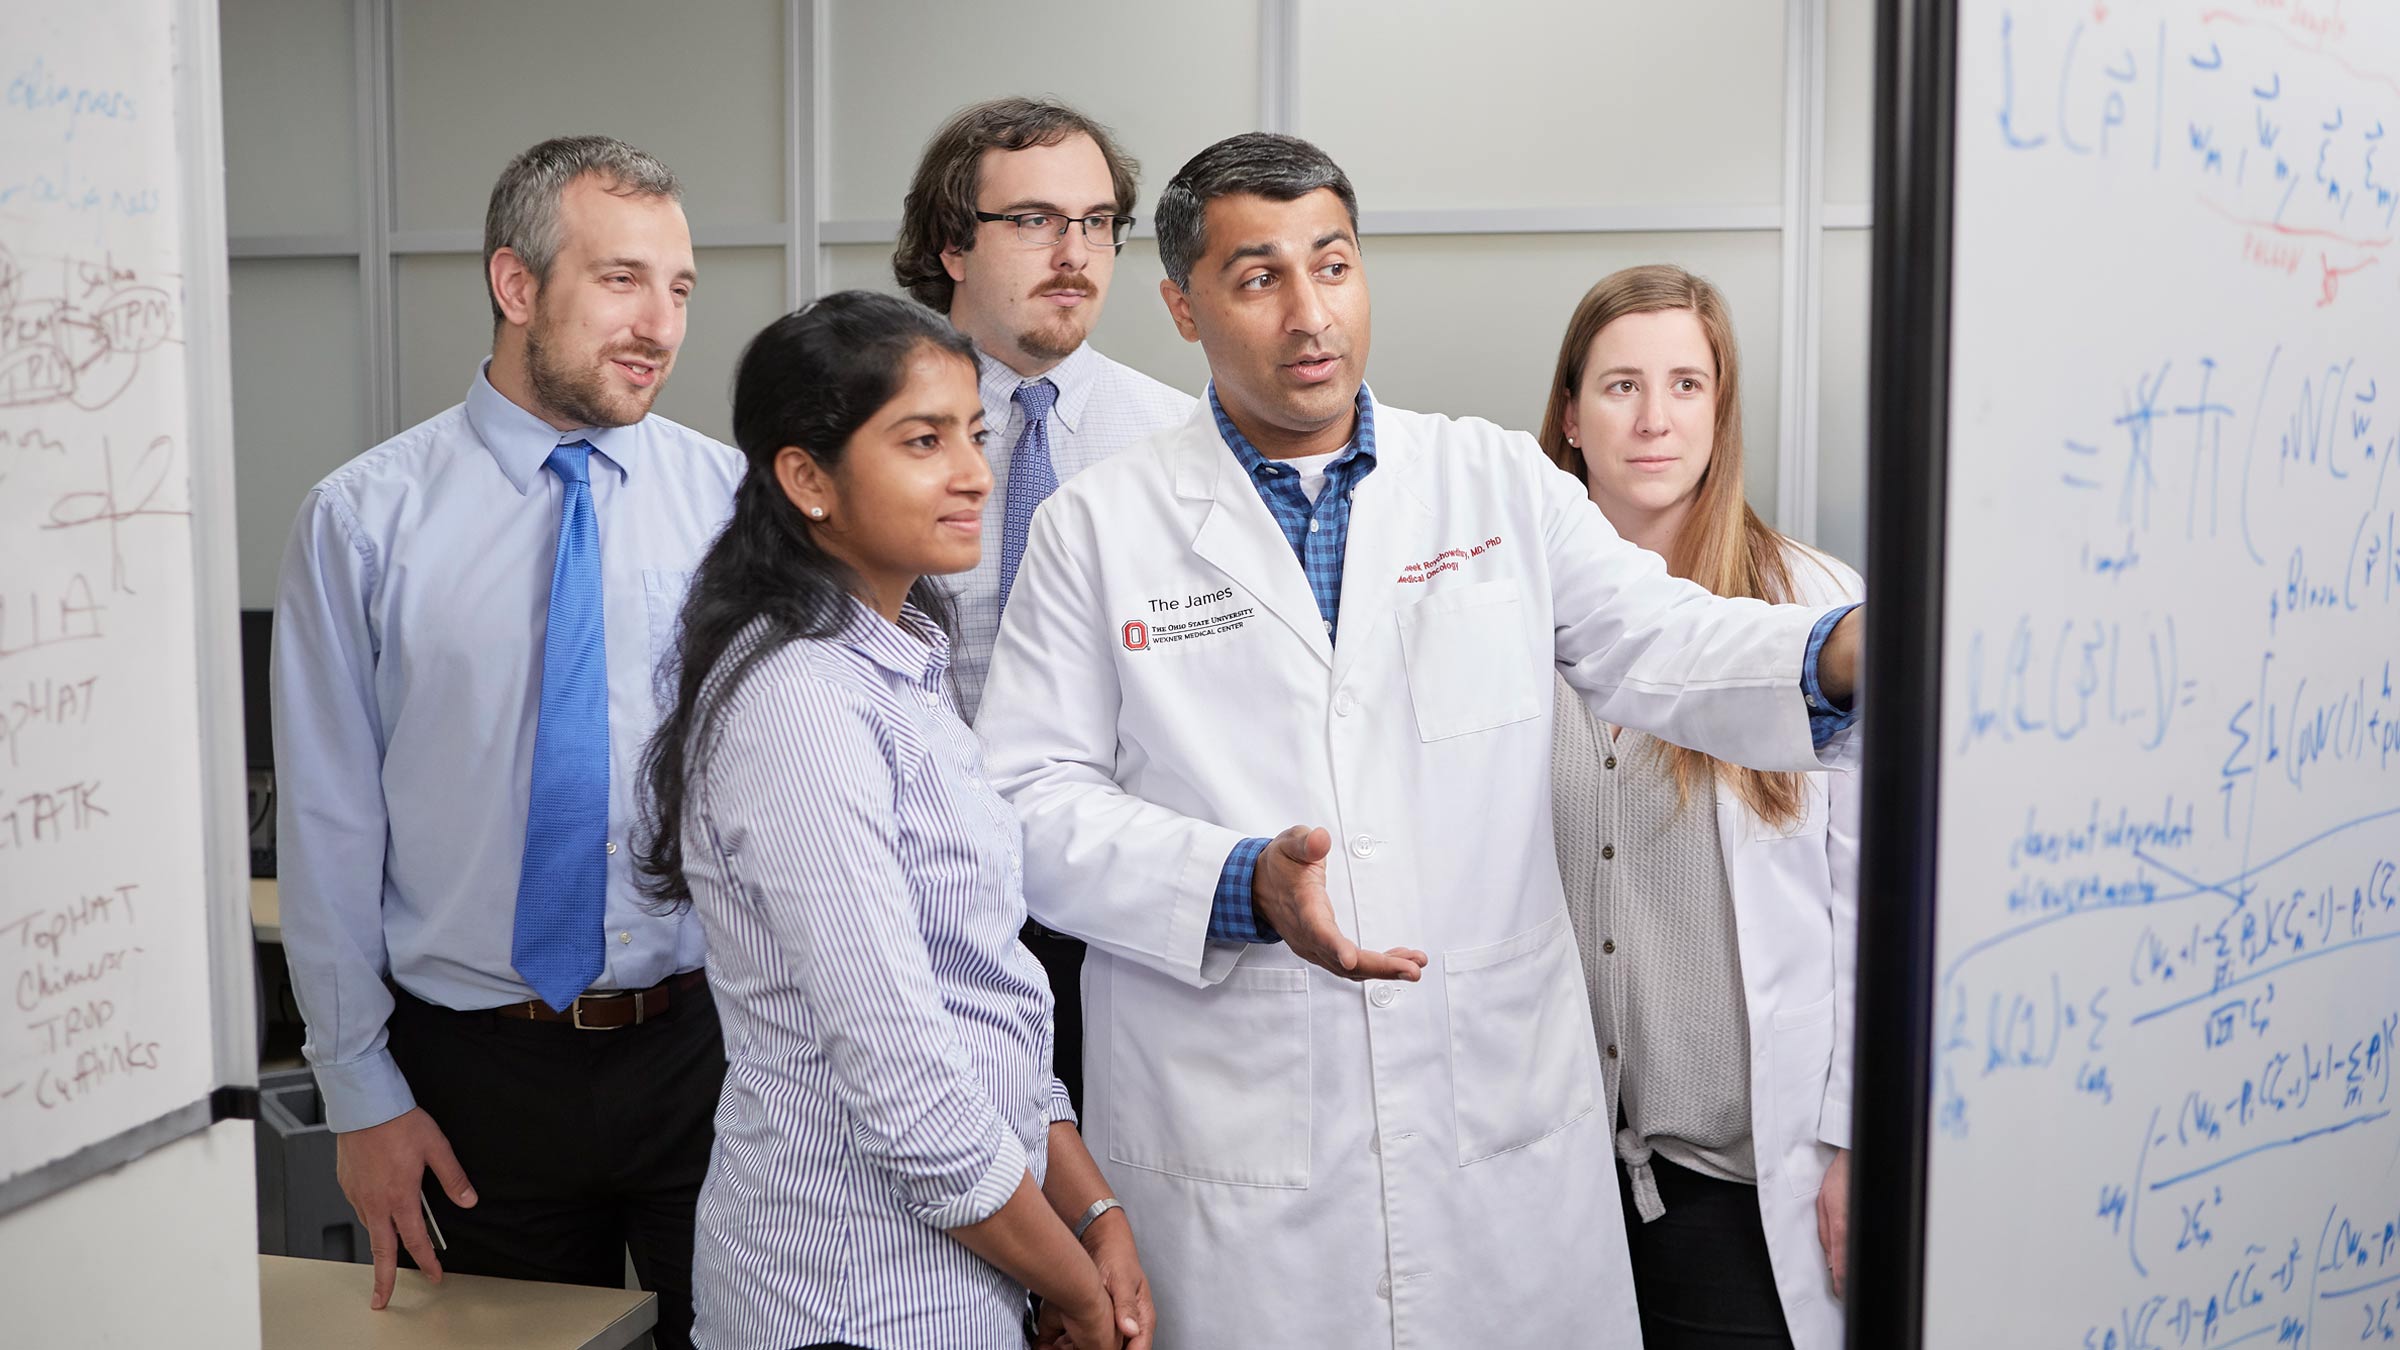 Sameek Roychowdhury, MD, PhD, consults with members of his laboratory.